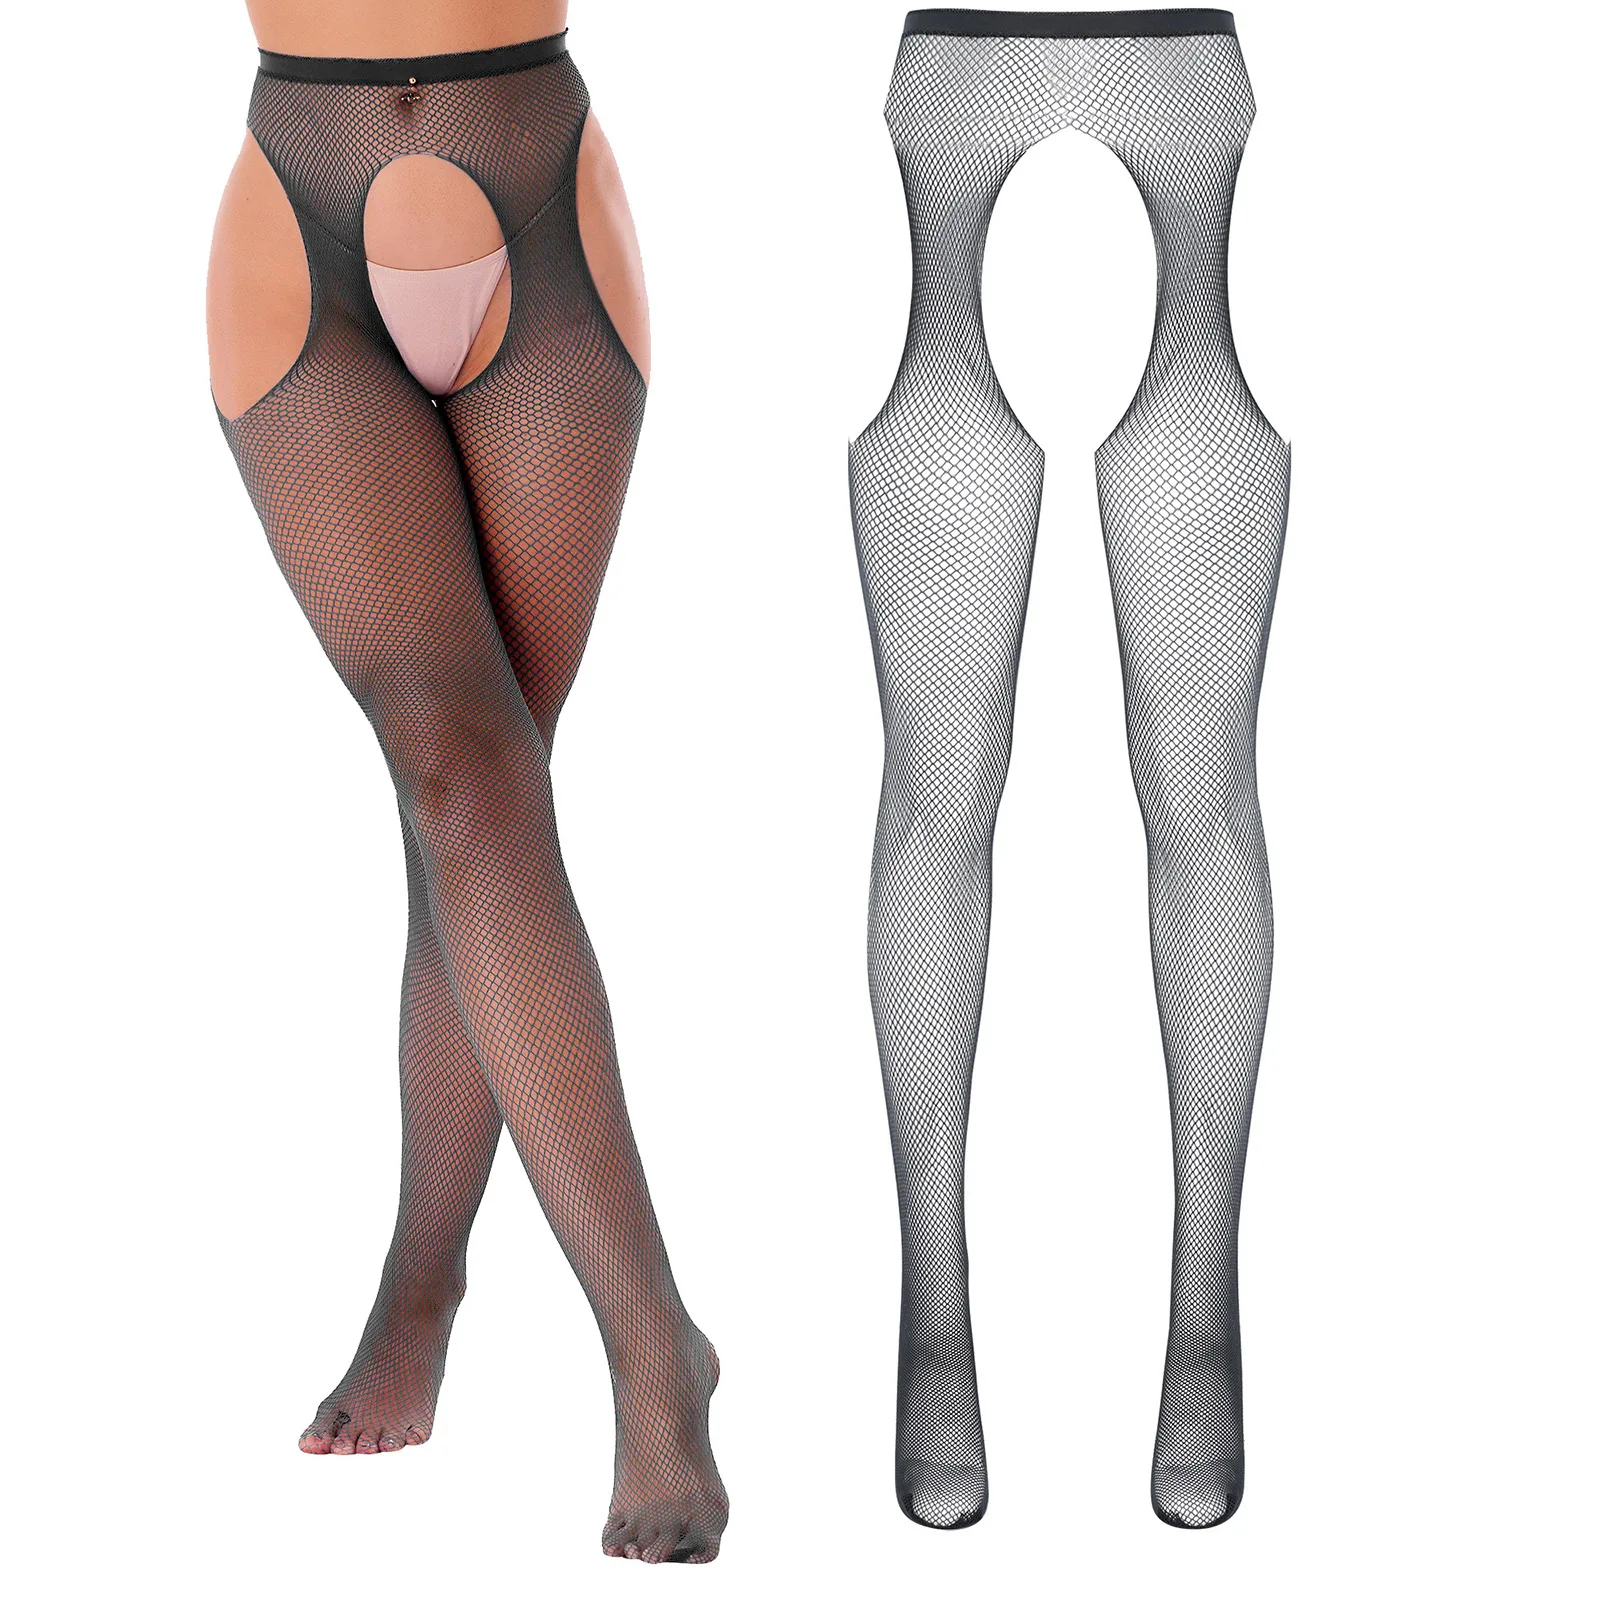 Womens Sexy Open Crotch Pantyhose Stockings Hollow Out Mid Waist Elastic Cutout Crotchless Leggings Underwear Erotic Lingerie female porn fishnet sexy underwear erotic costumes hollow out open crotch lingerie bodystockings women sex product teddies w7016